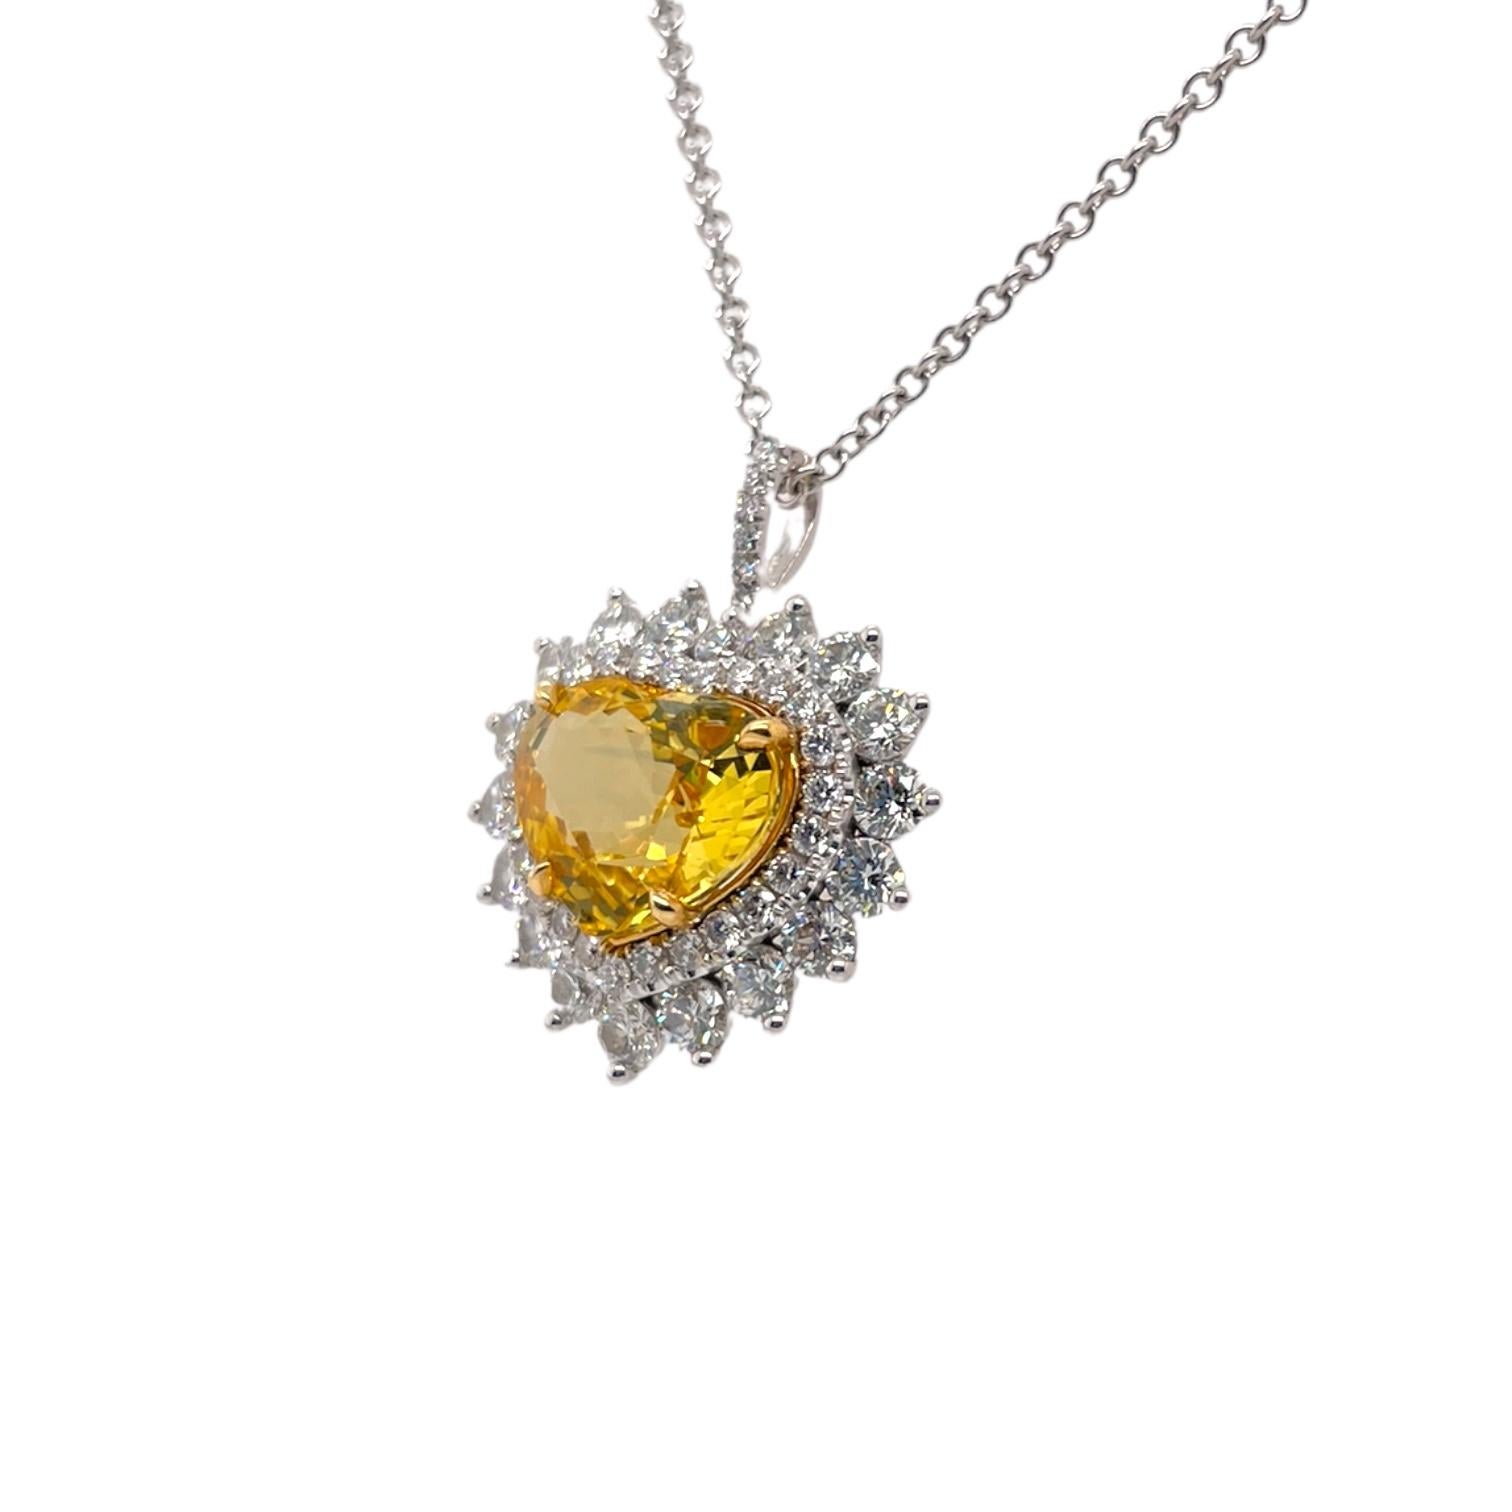 One of a kind heart shape yellow sapphire, 5.17cts and 43 round brilliant diamonds surrounding center stone, 1.70tcw. Diamonds within halo are near colorless and VS in clarity, excellent cut. All stones are mounted in handmade prong setting. Pendant